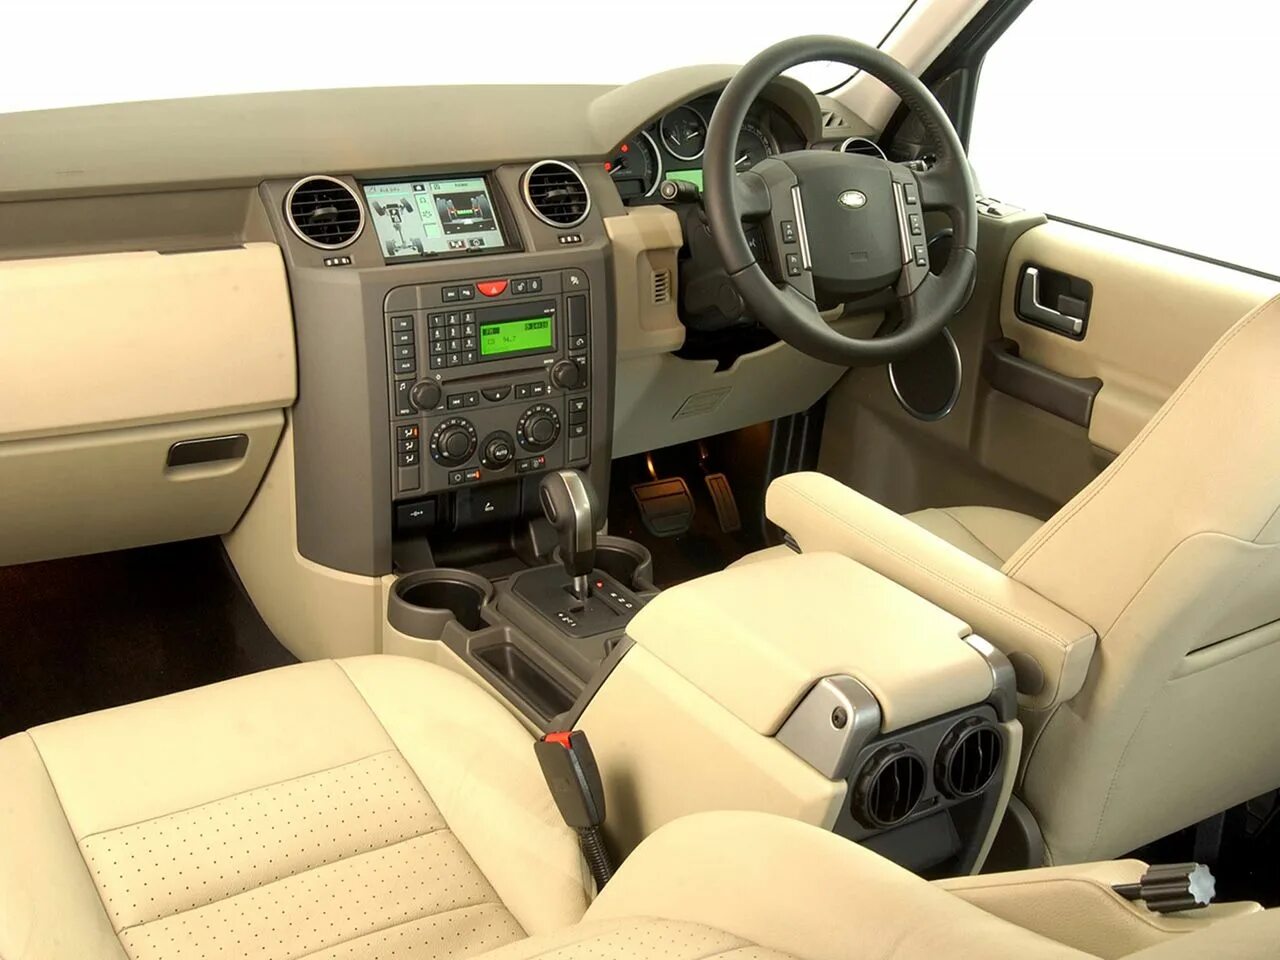 Land Rover Discovery 3 2005. Land Rover Discovery 3 салон. Land Rover Discovery 3 Interior. Лэнд Ровер Дискавери 3 салон. Дискавери 3 салон